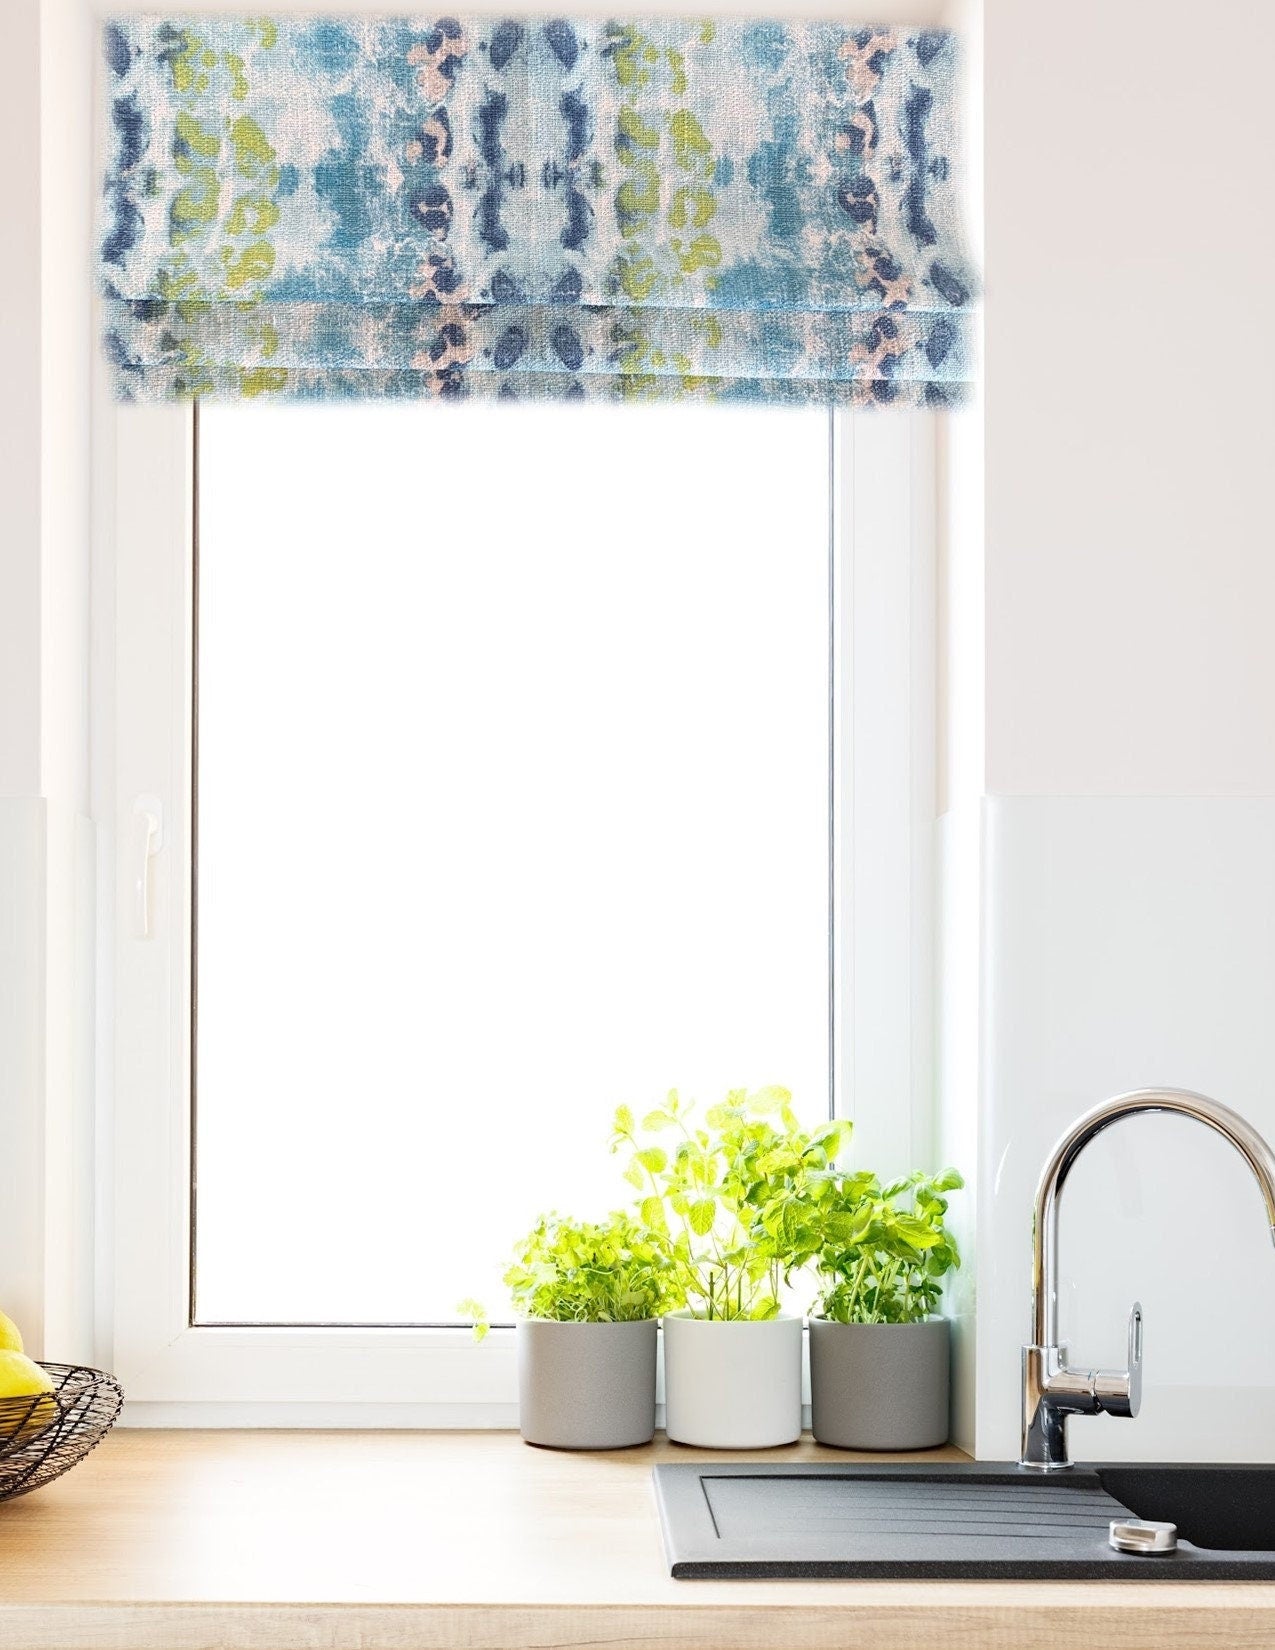 Faux Roman Shade Valance in Blue, Green and Natural Birch Pattern on 100% Premium Cotton Fabric, Custom Made, Fully Lined Valance